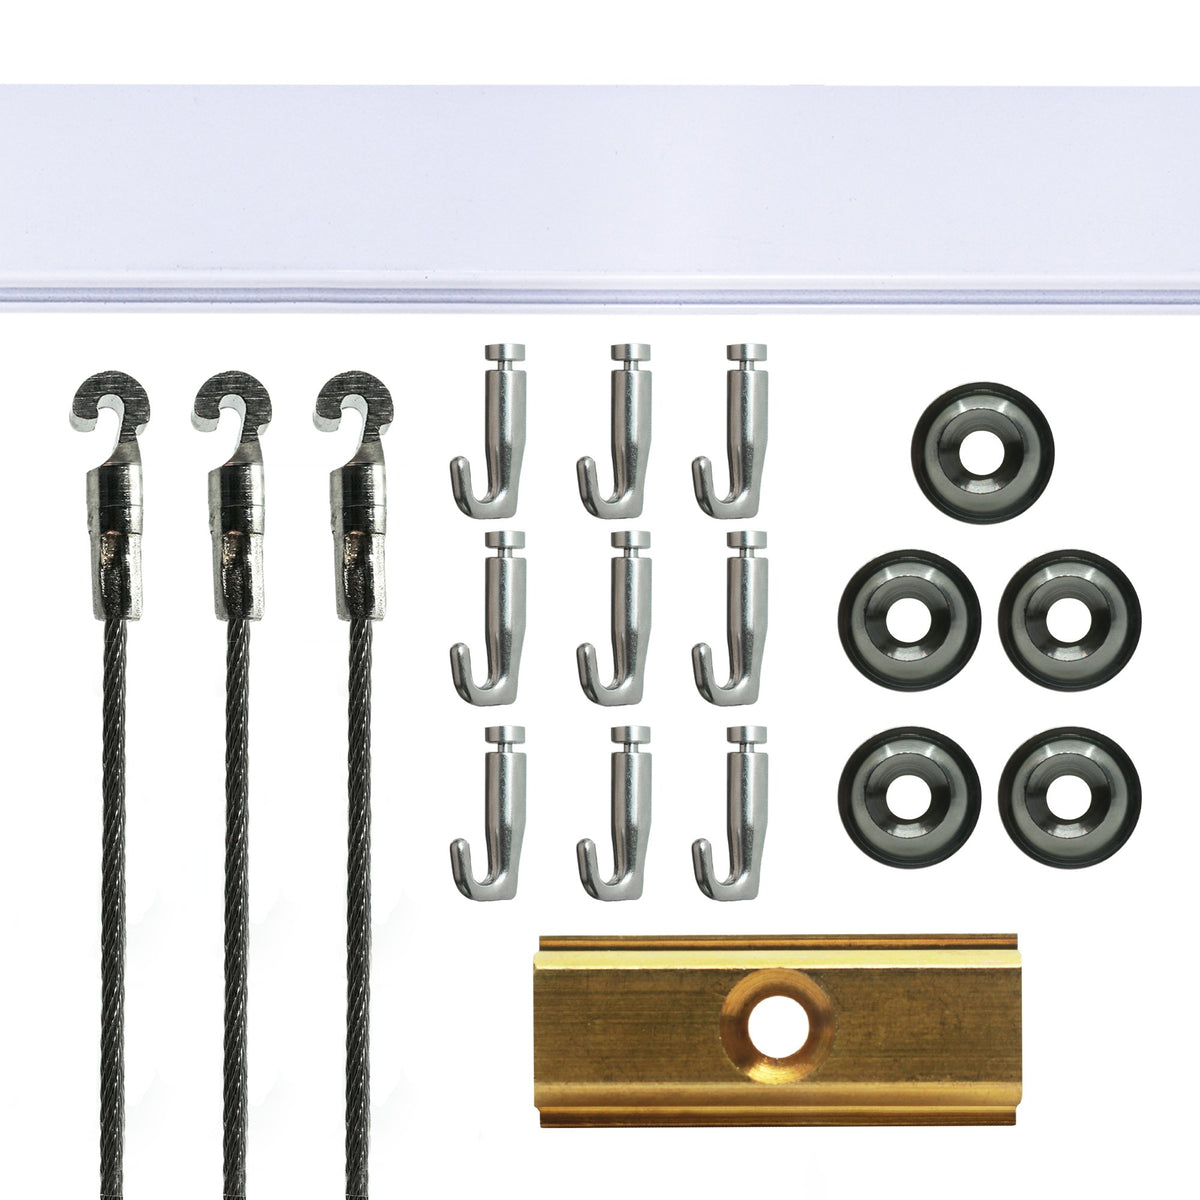 Track 100 Kit With Steel Cords And Hardware - GSW-TR00-KITS - Picture Hang Solutions